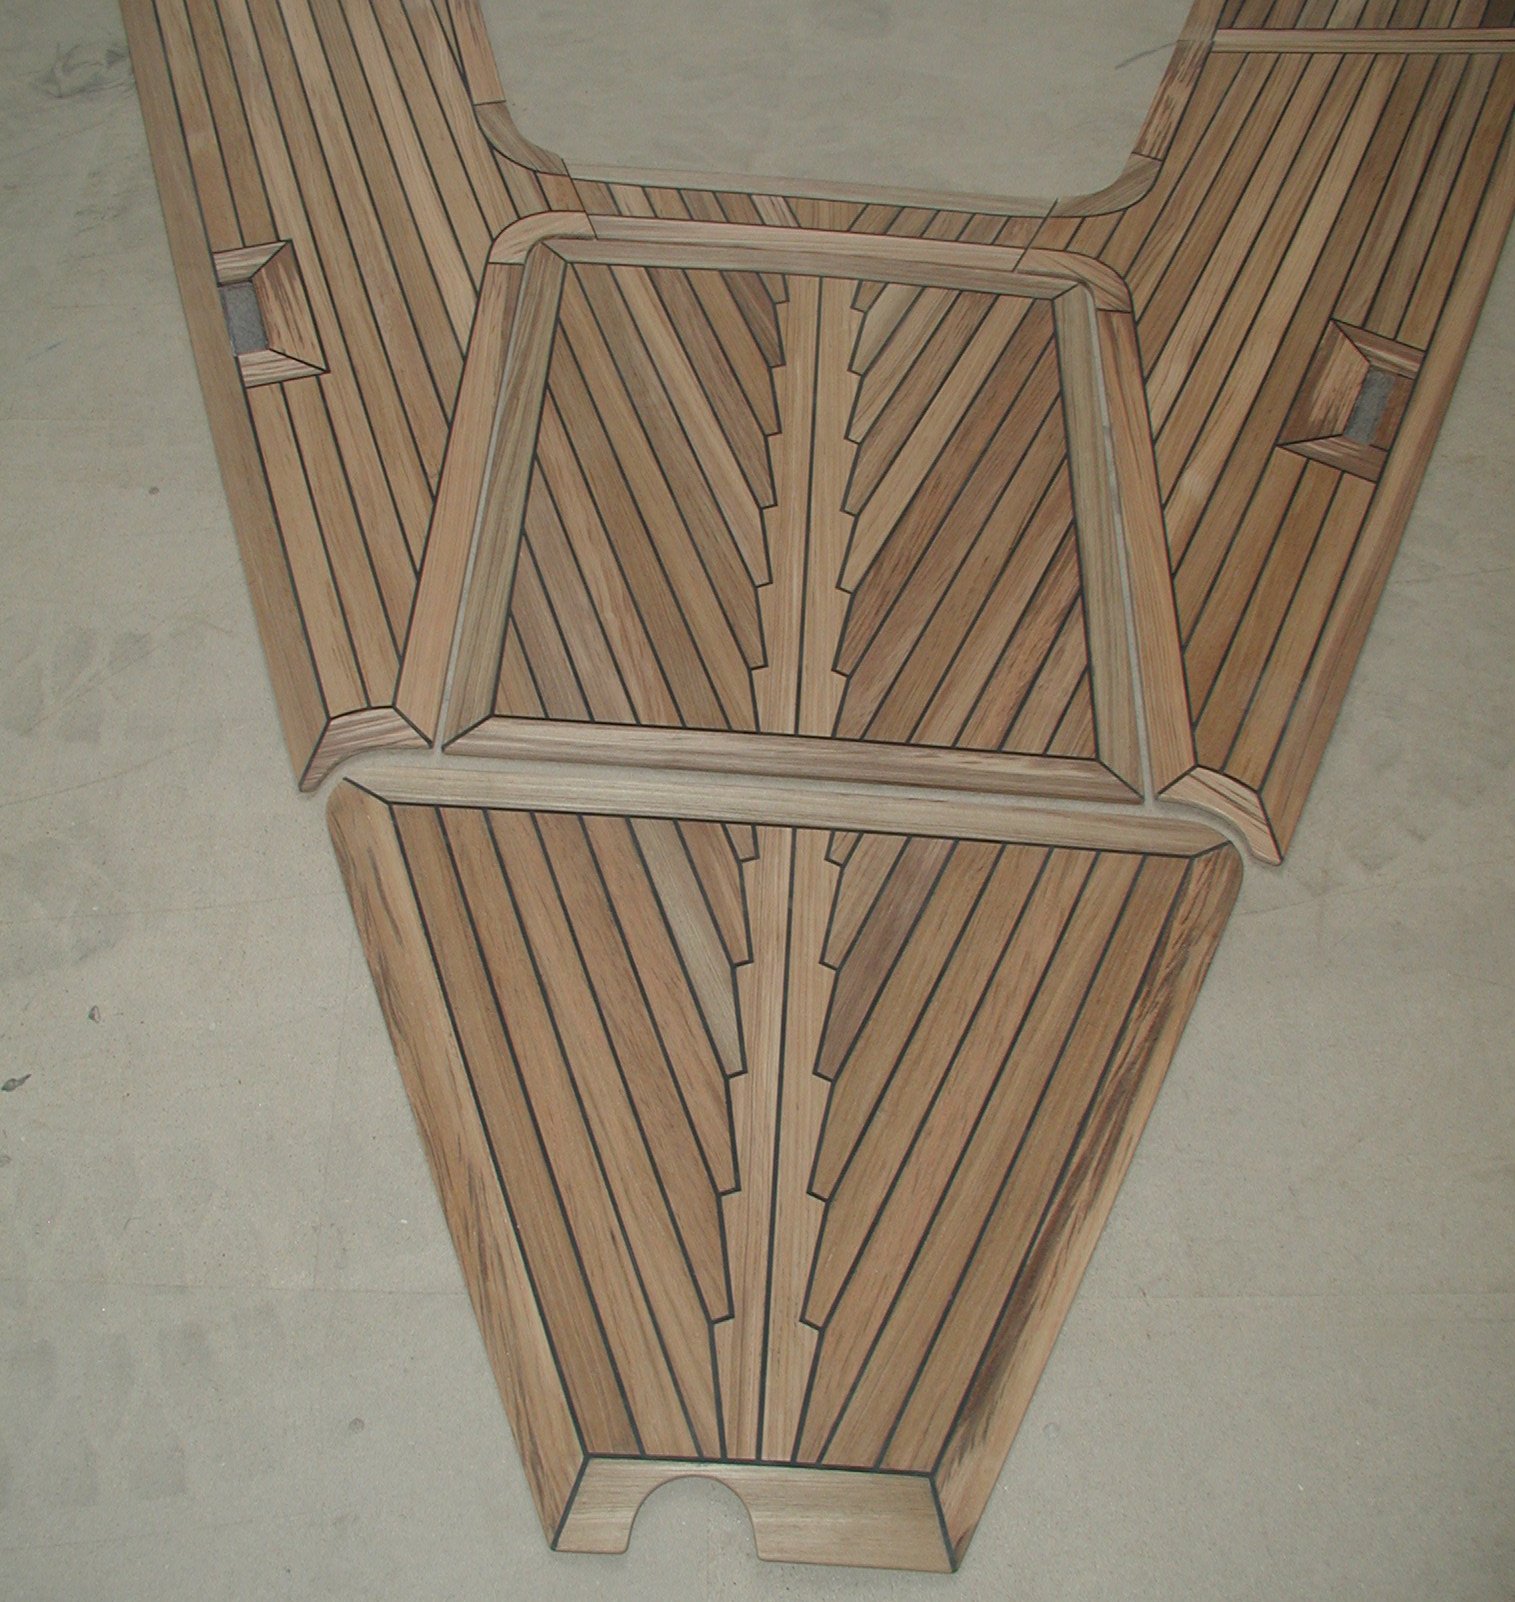 View on a second prefabricated woodendeck in teak